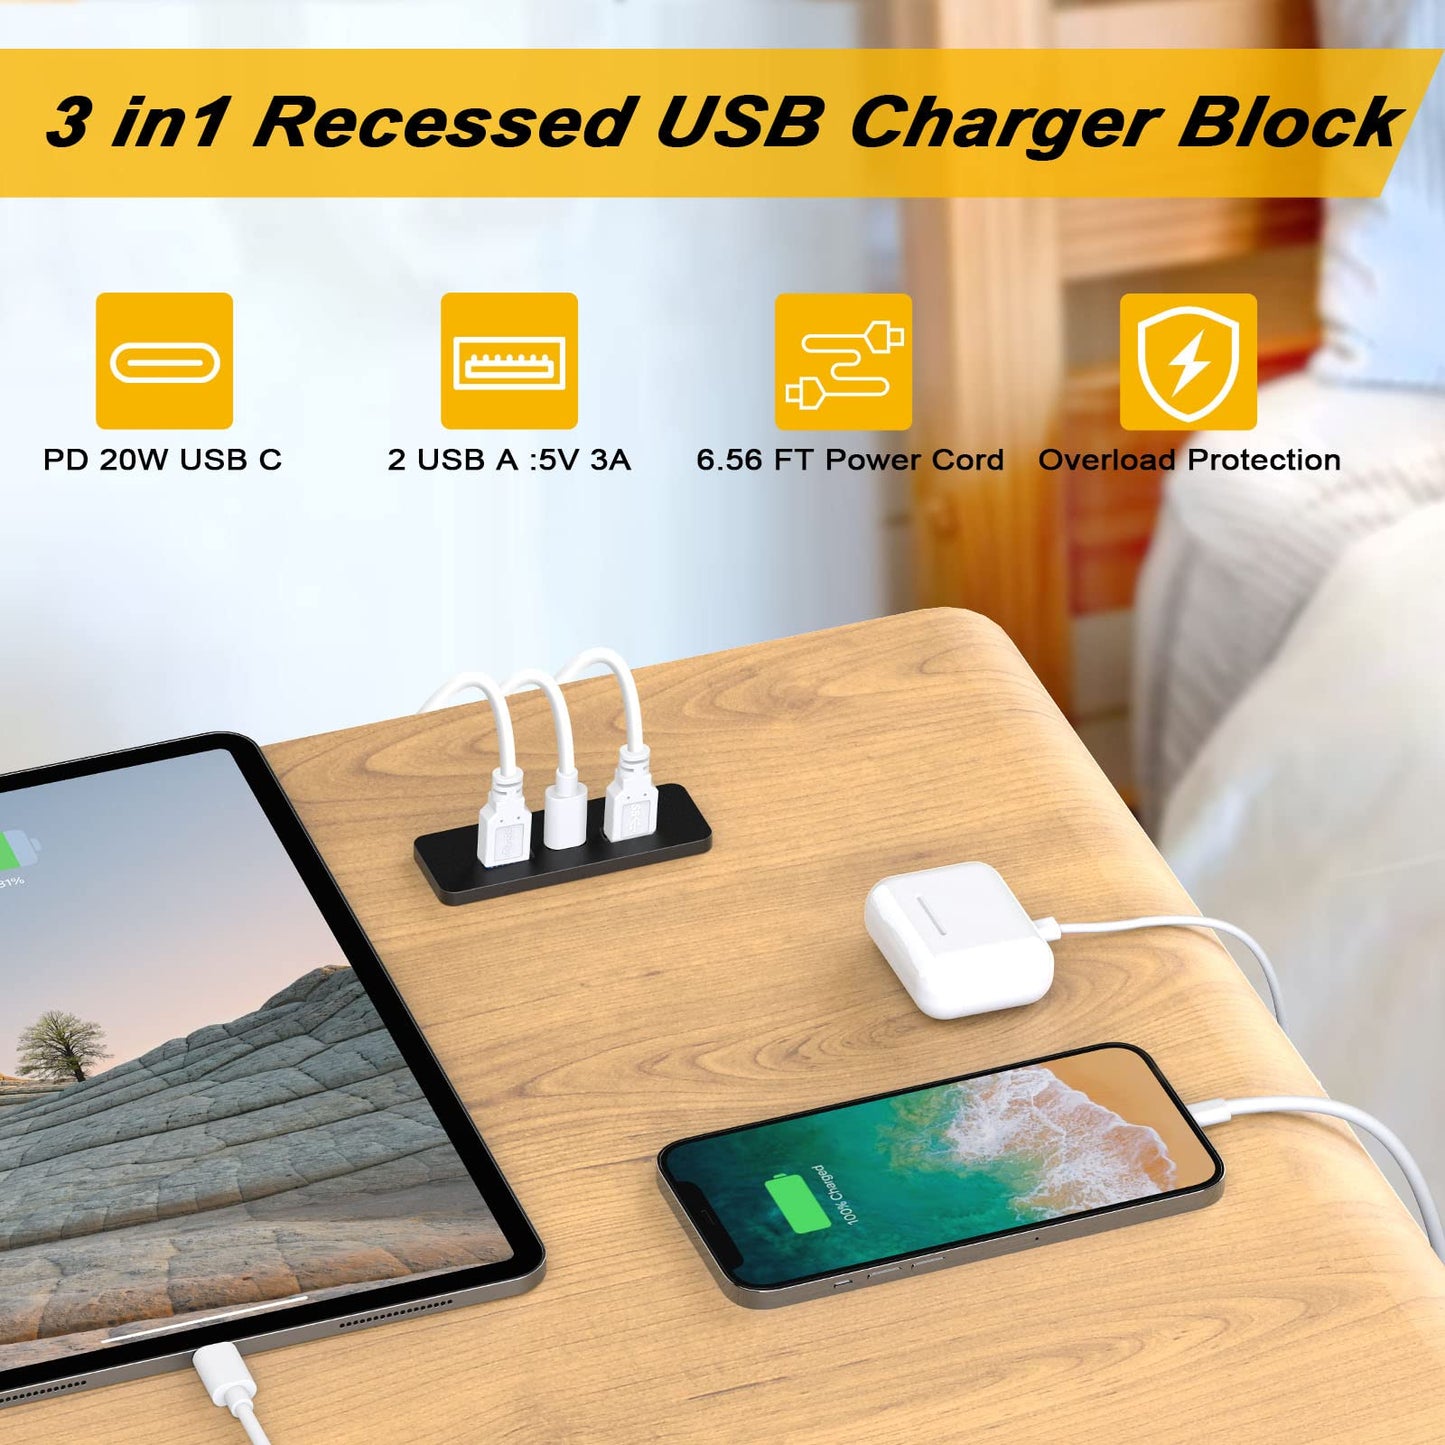 Recessed USB Hub Block Charging Station with PD 20W USB C